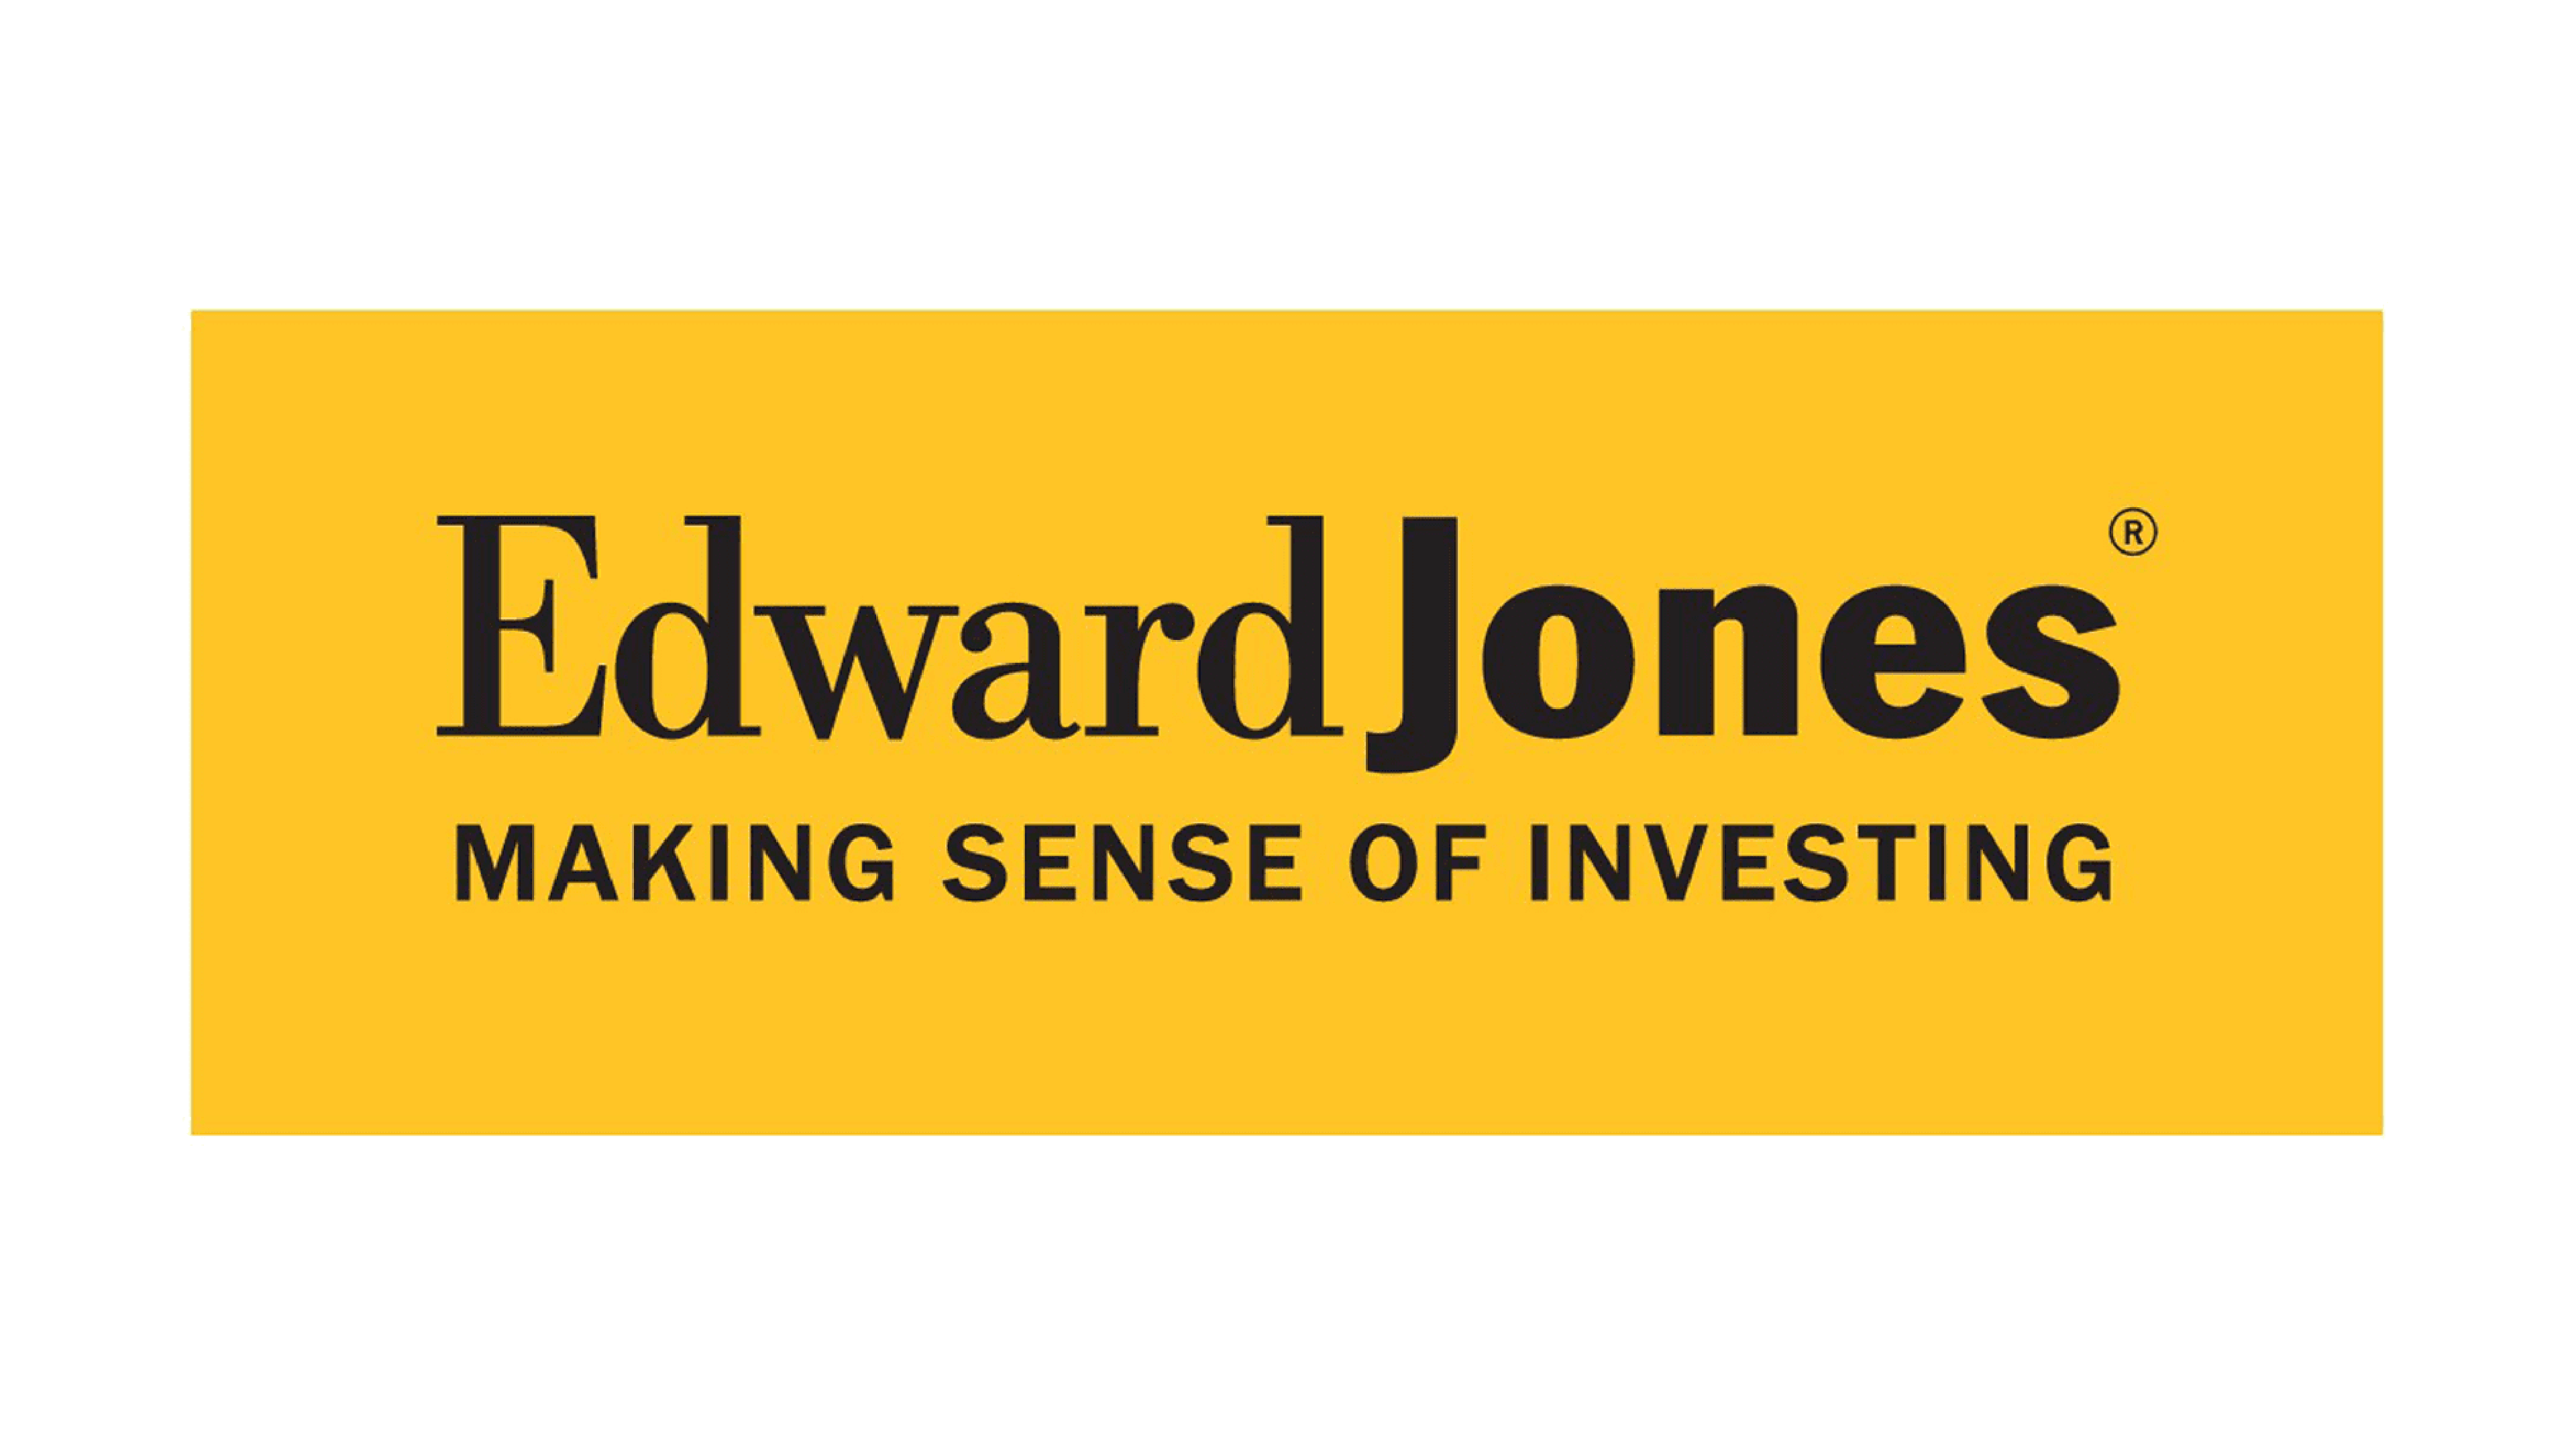 Edward Jones Making Sense of Investing Click to redirect to their website